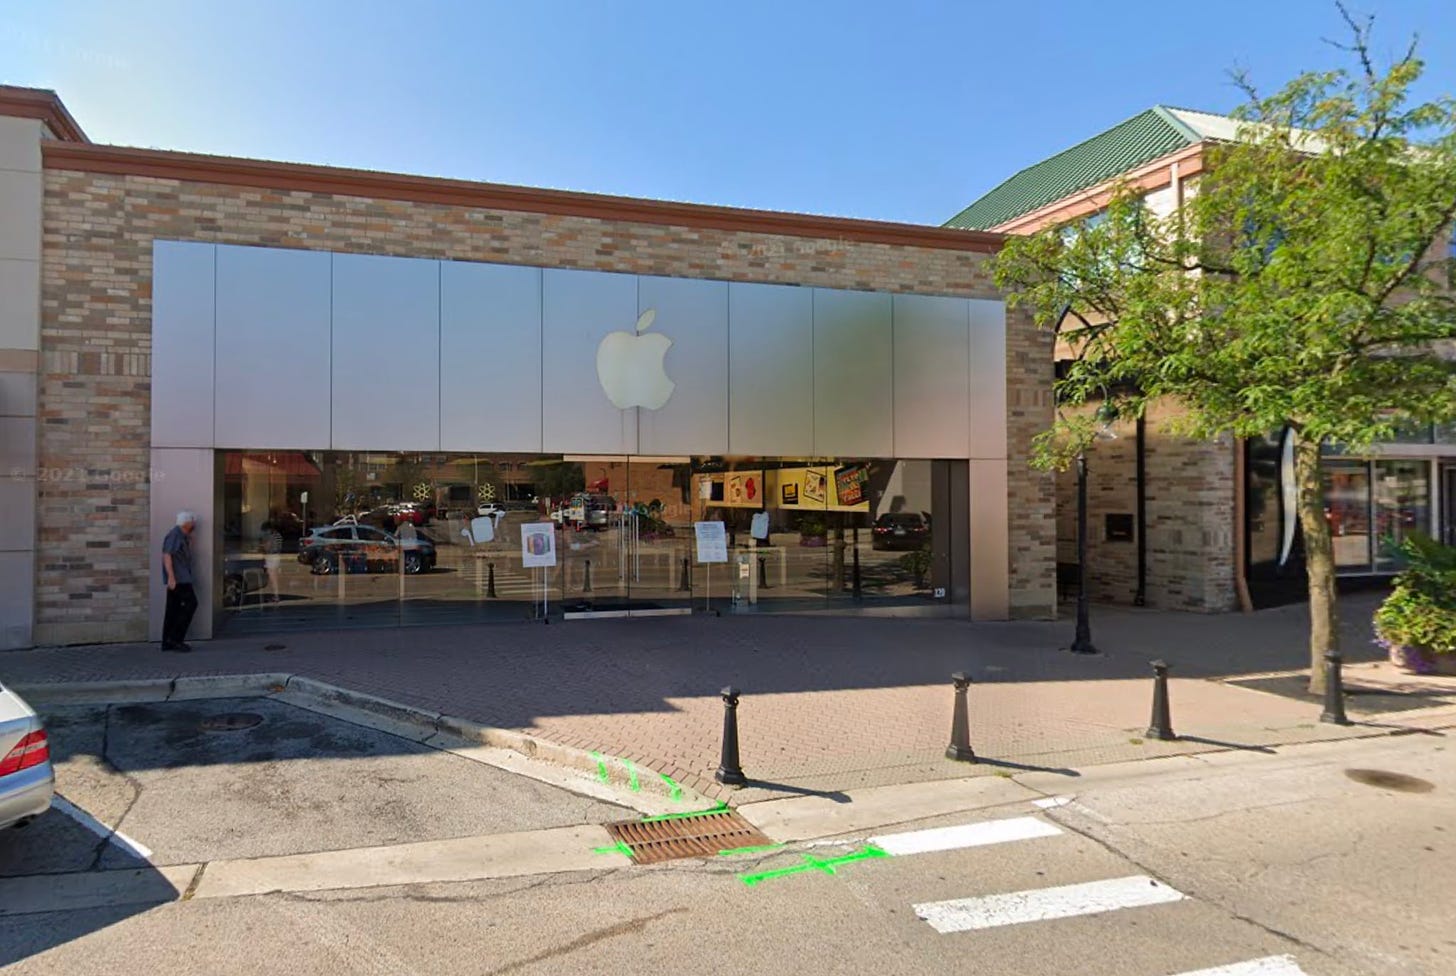 A Google Maps Street View screenshot of Apple Main Place. The store has bollards between the sidewalk and the road.